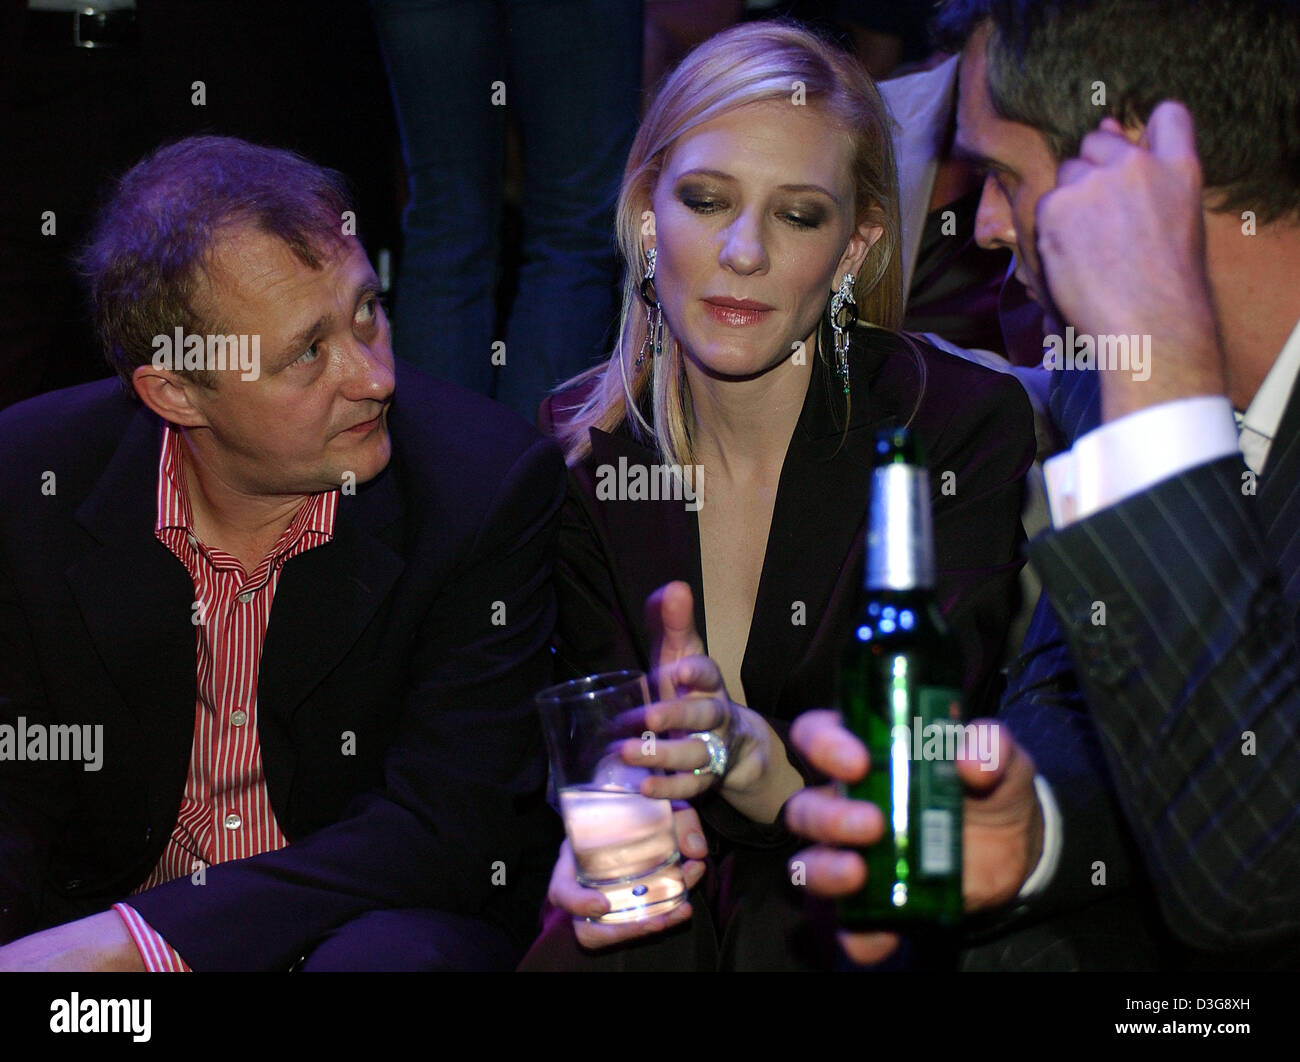 (dpa) - Australian actress Cate Blanchett and her husband Andrew Upton (L) visit the Boss fashion show at the German Opera in Berlin, Friday, 22 July 2005. The fashion company presented the Orange and Black line of its men's and women's summer 2006 collection. Stock Photo